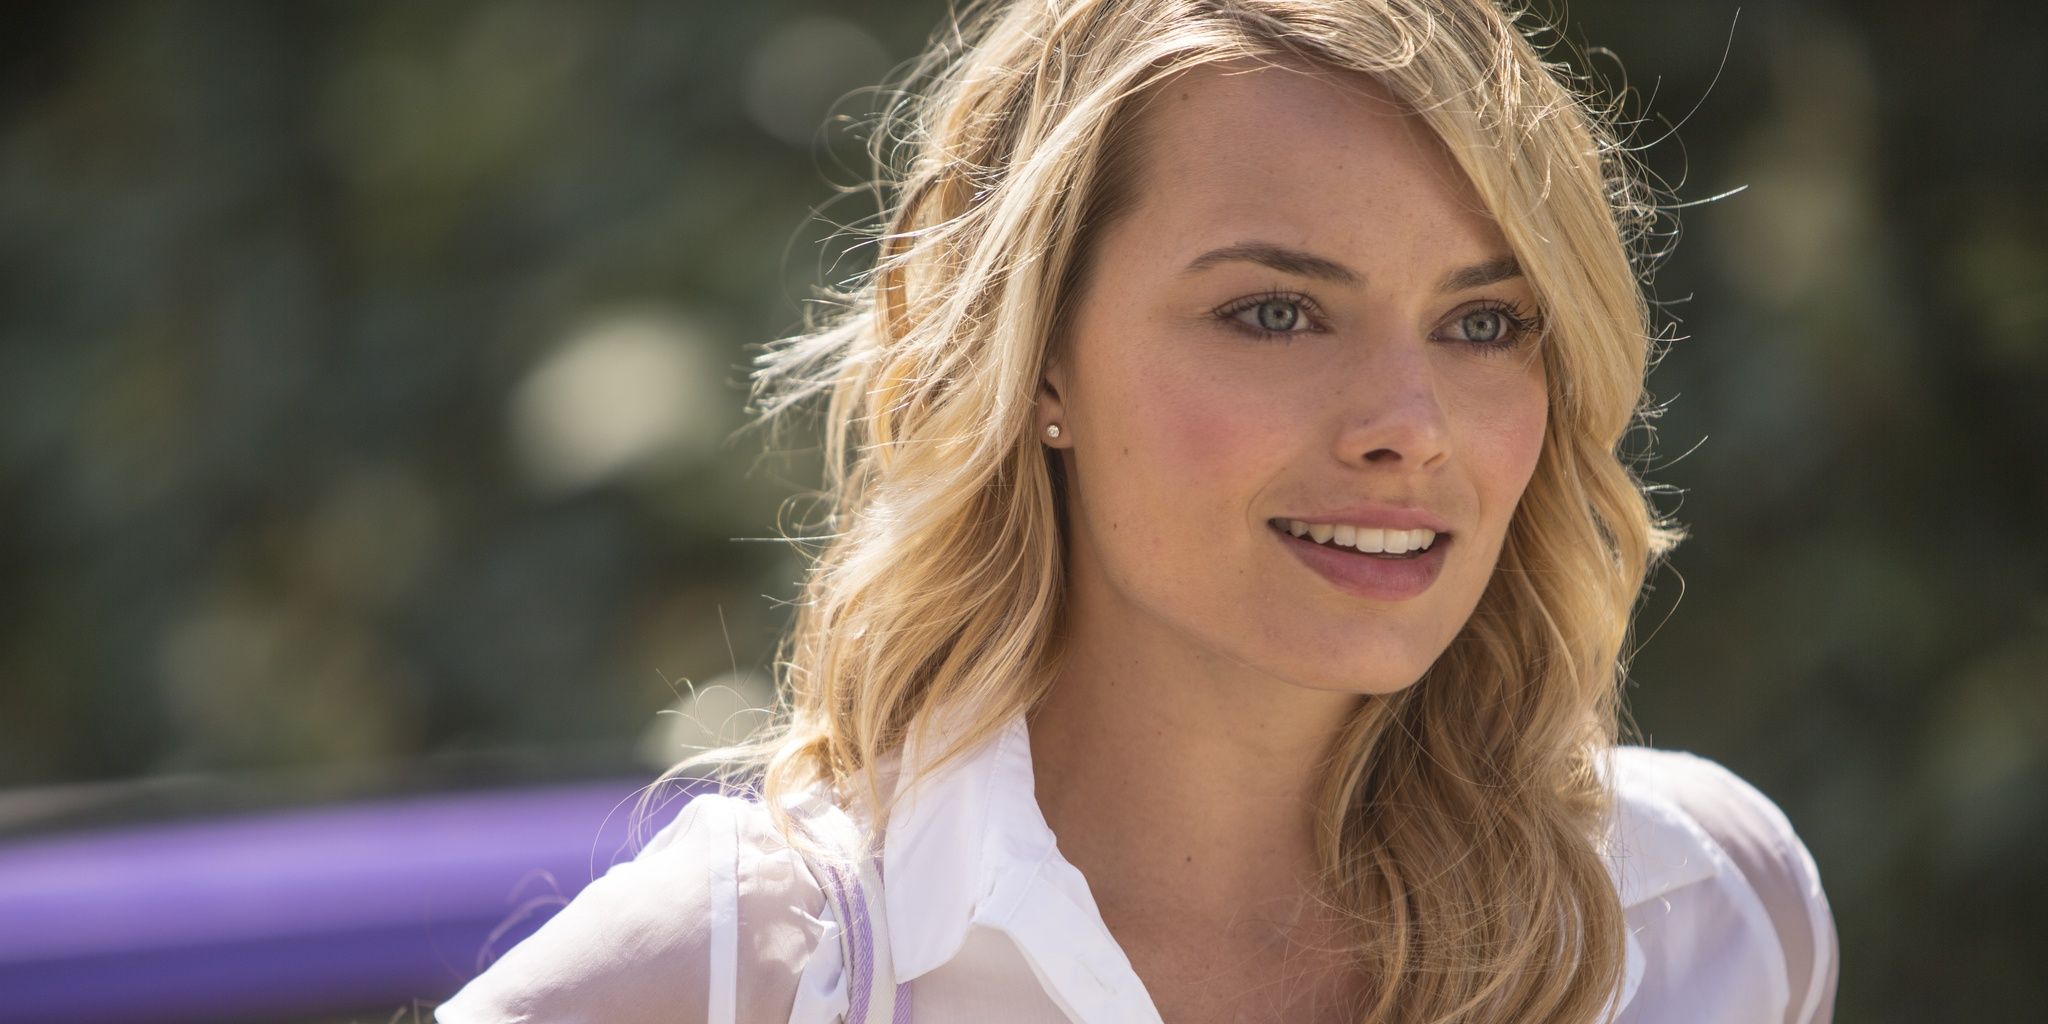 About Time 2013 Margot Robbie